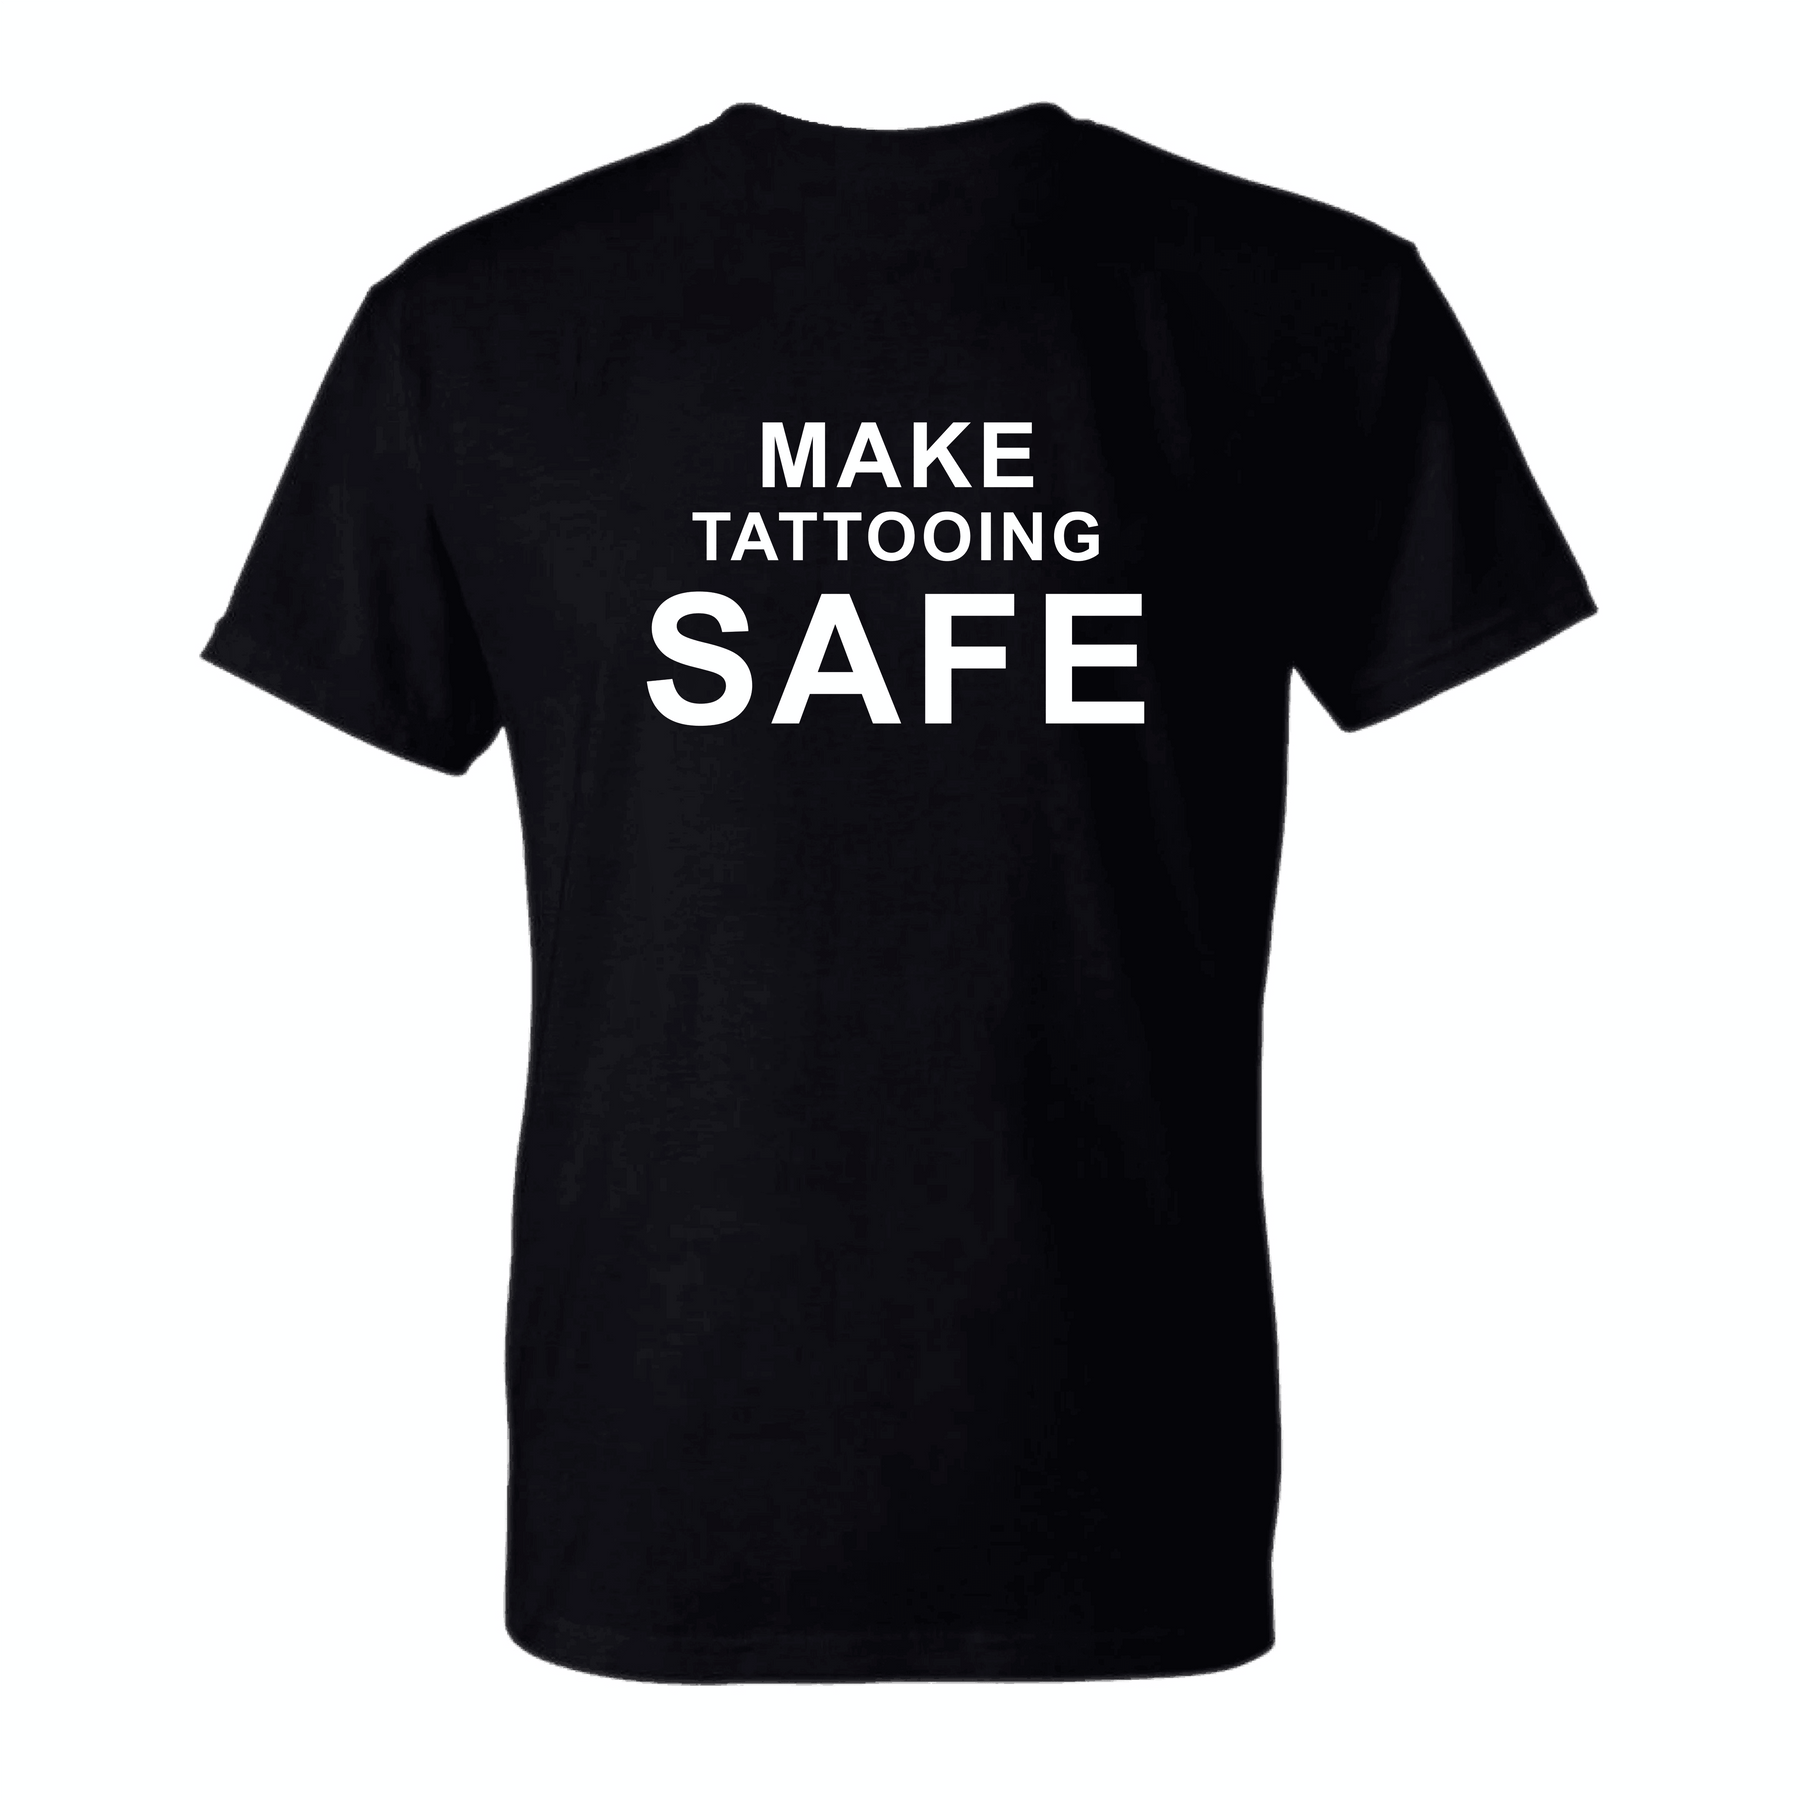 Black T-Shirt white "MAKE TATTOOING SAFE" print on the back is on sale on Emalla Official Website